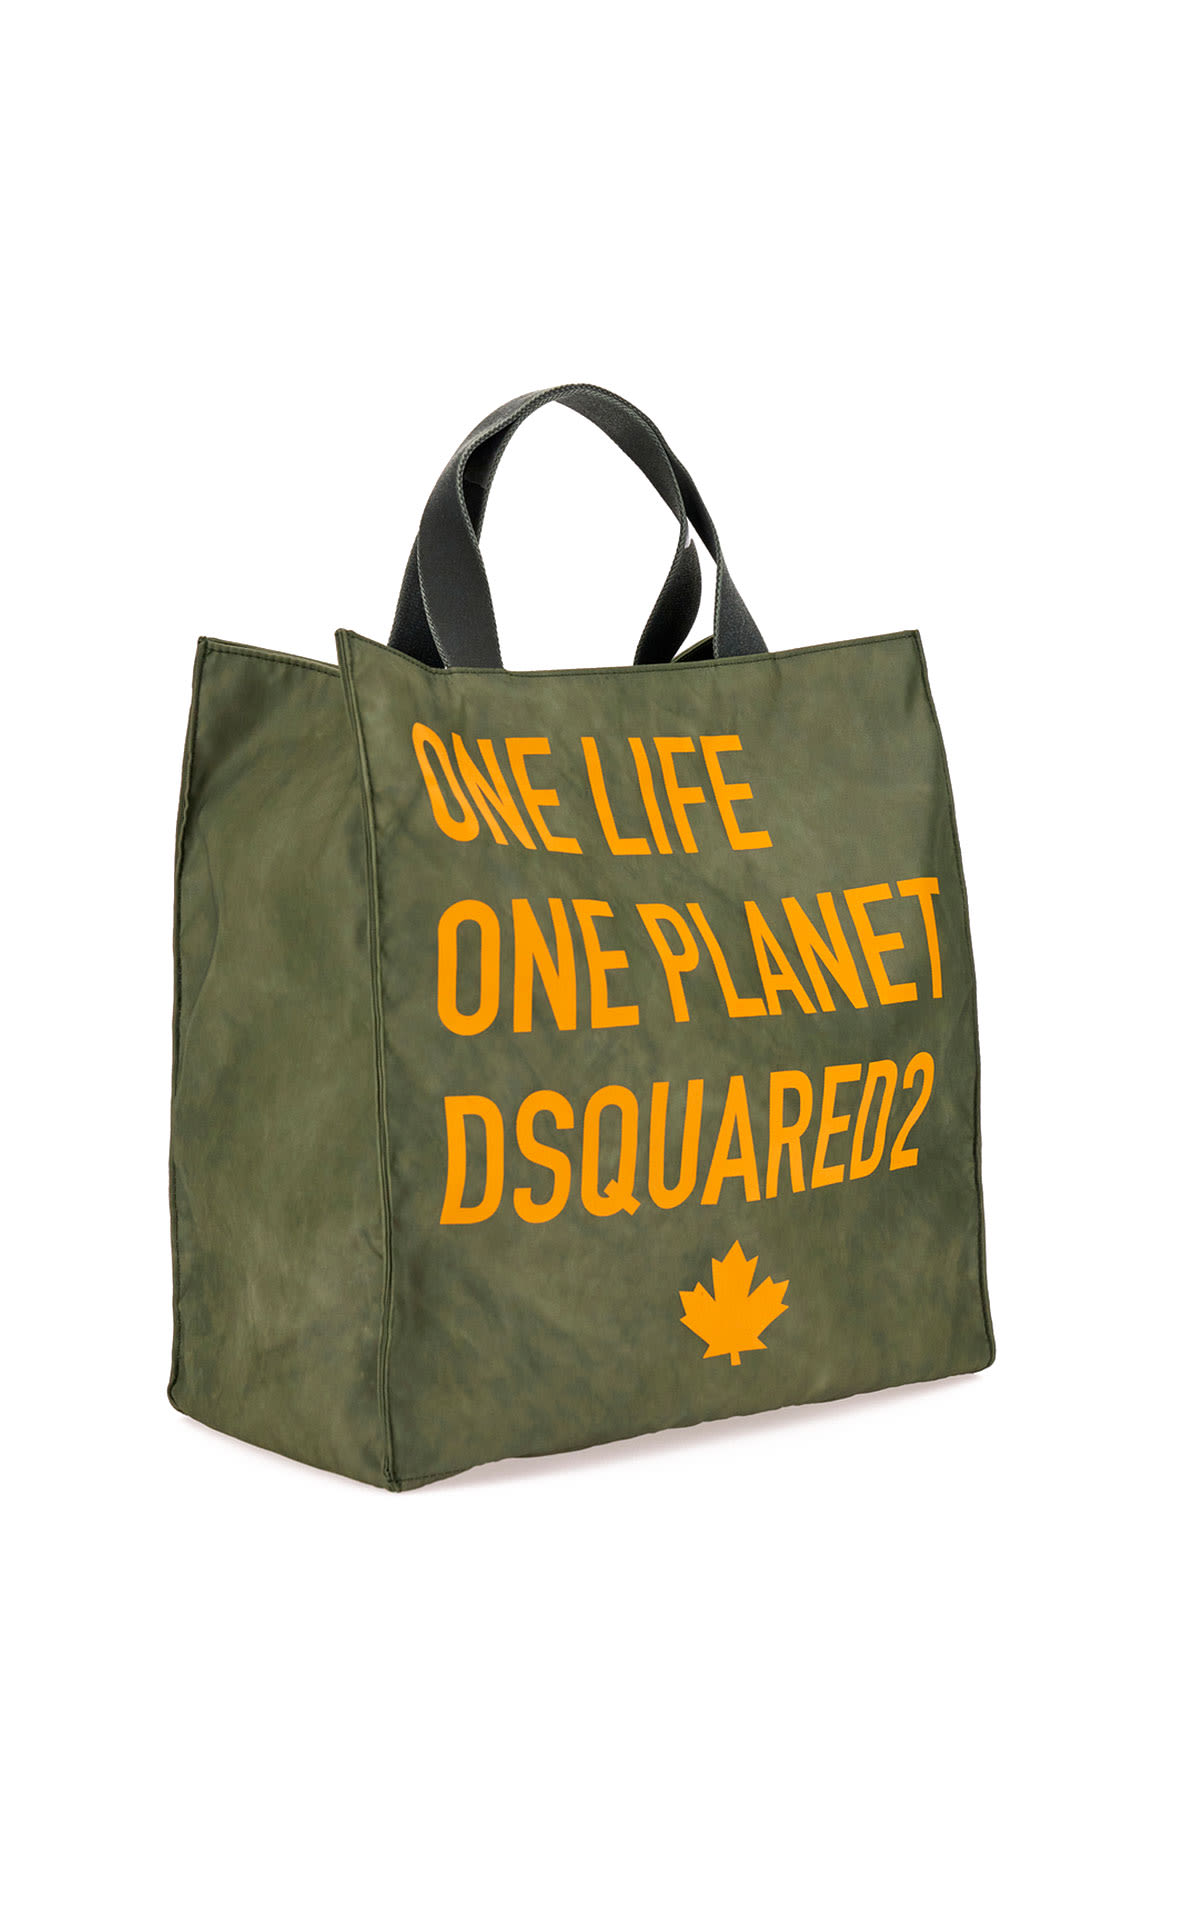 One Life One Planet Tote Bag Dsquared2